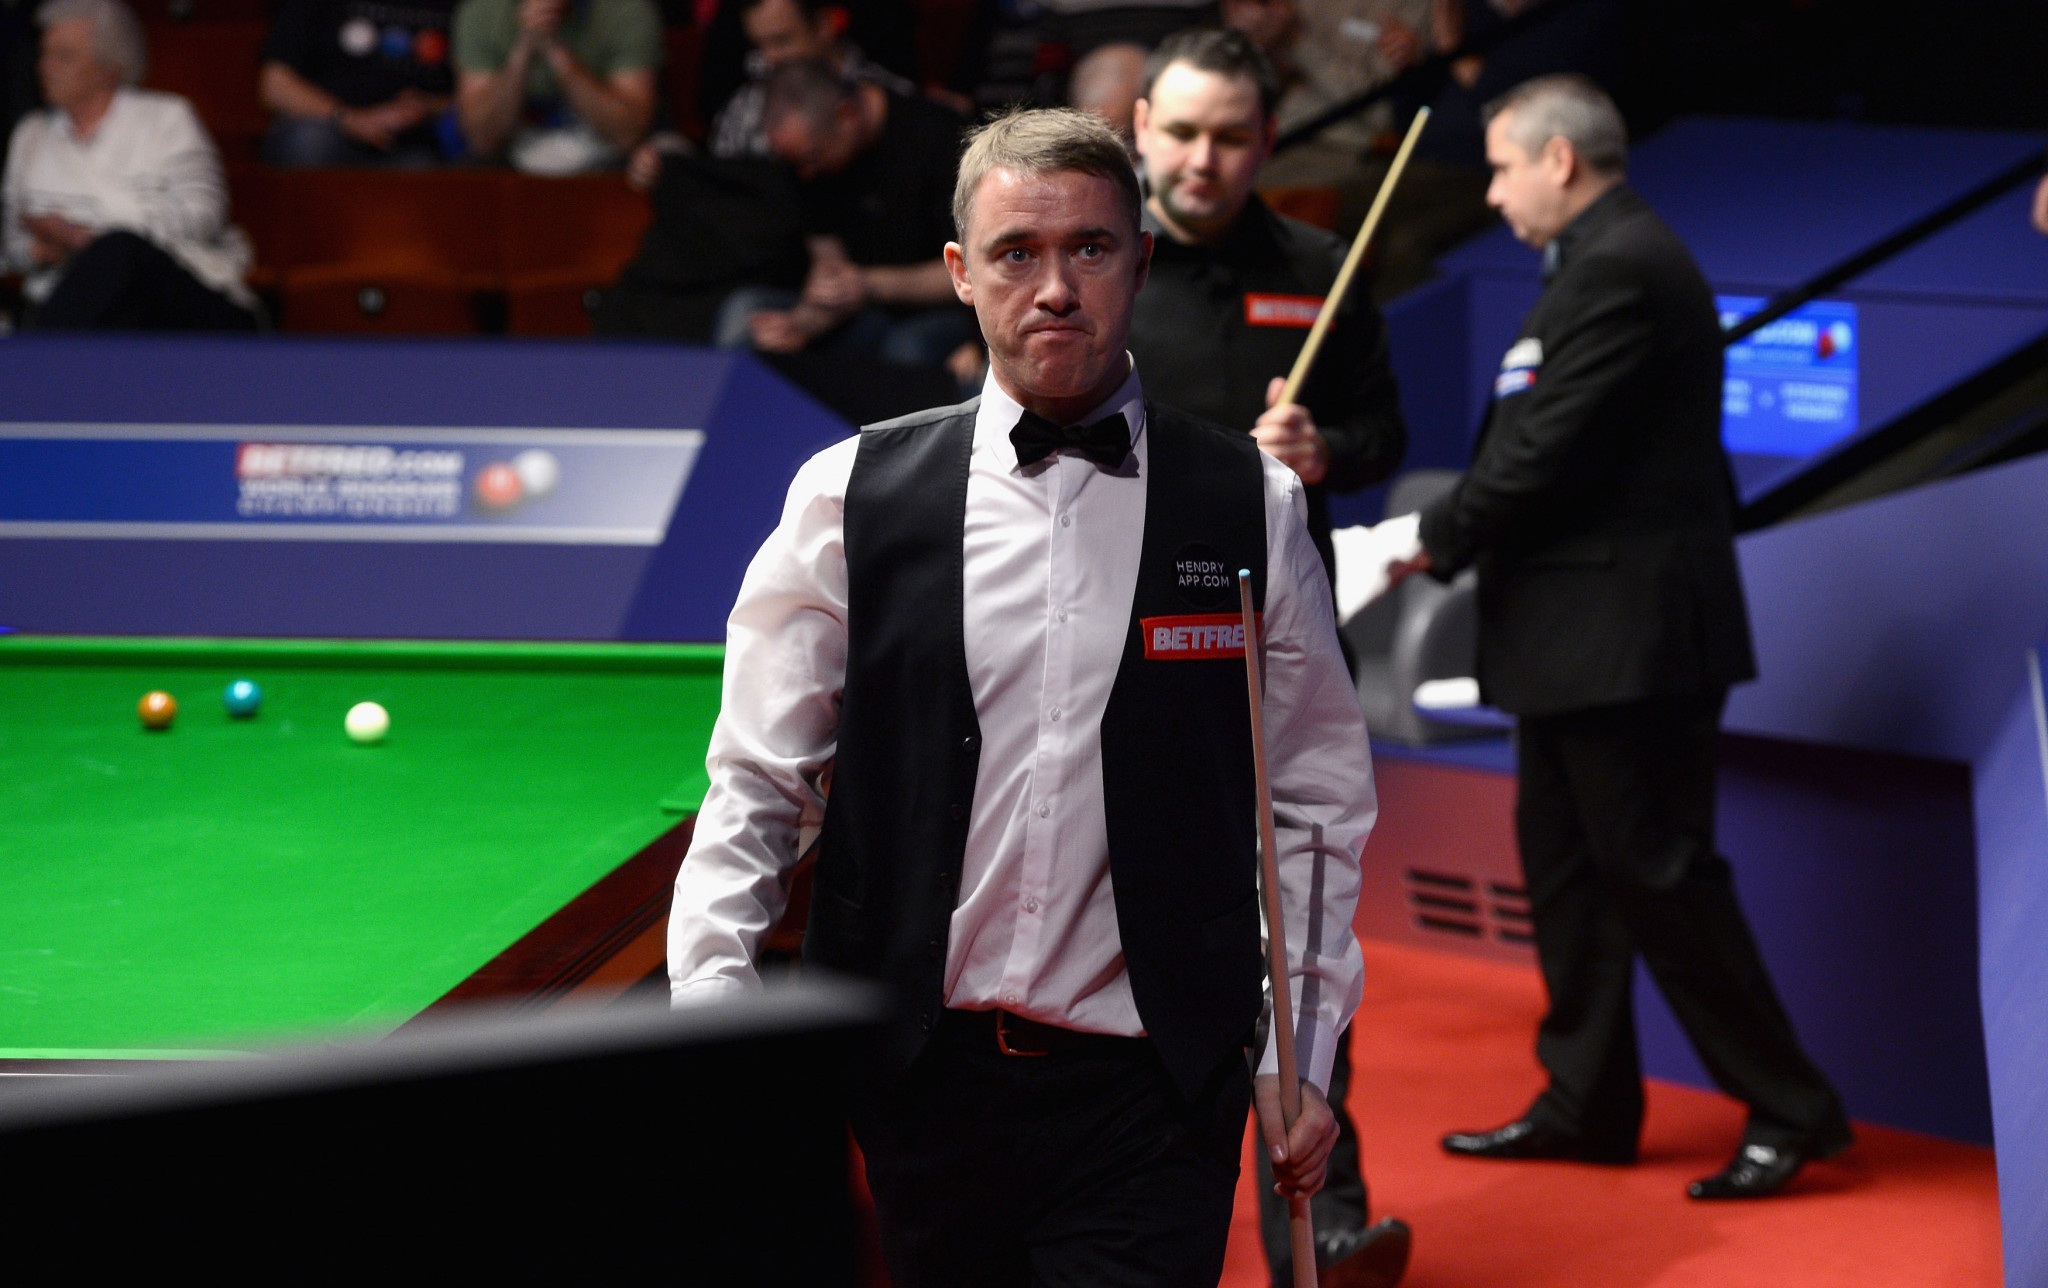 Stephen Hendry's last appearance at the World Championship came in 2012 ©Getty Images